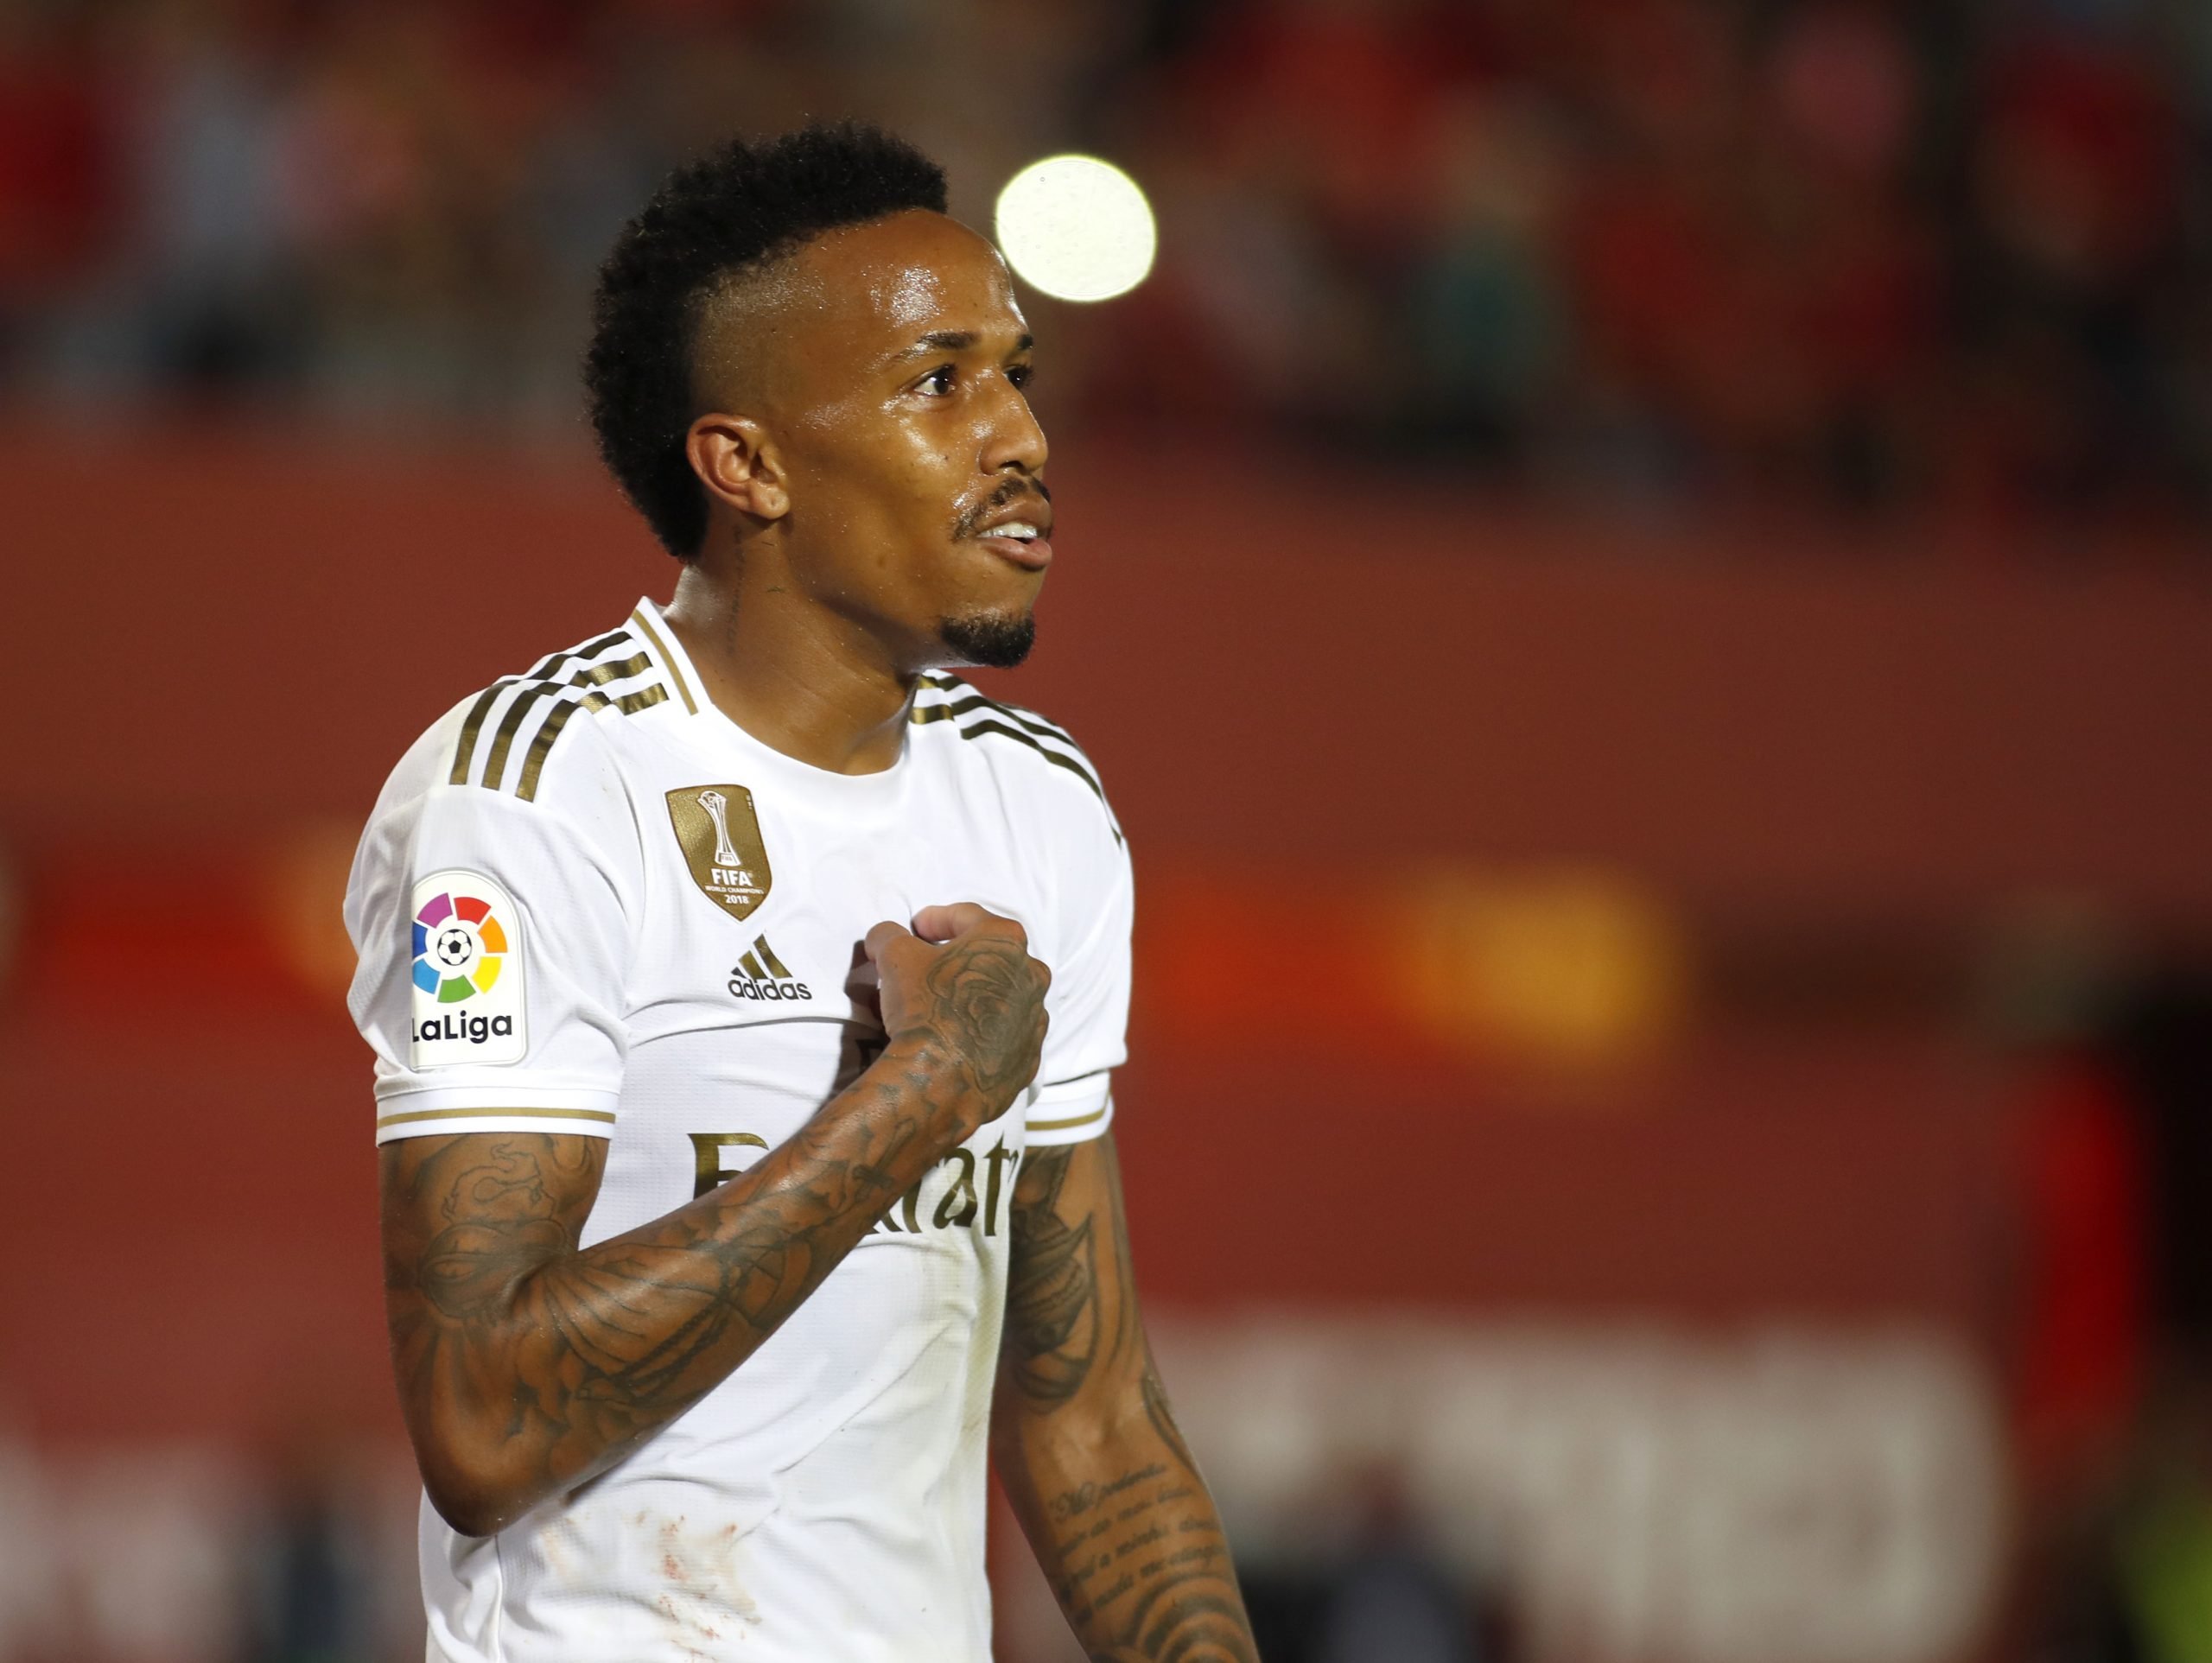 Real Madrid's Brazilian defender Eder Militao gestures during the Spanish league football match RCD Mallorca against Real Madrid CF at the Iberostar estadi stadium in Palma de Mallorca on October 19, 2019. (Photo by JAIME REINA / AFP) (Photo by JAIME REINA/AFP via Getty Images)